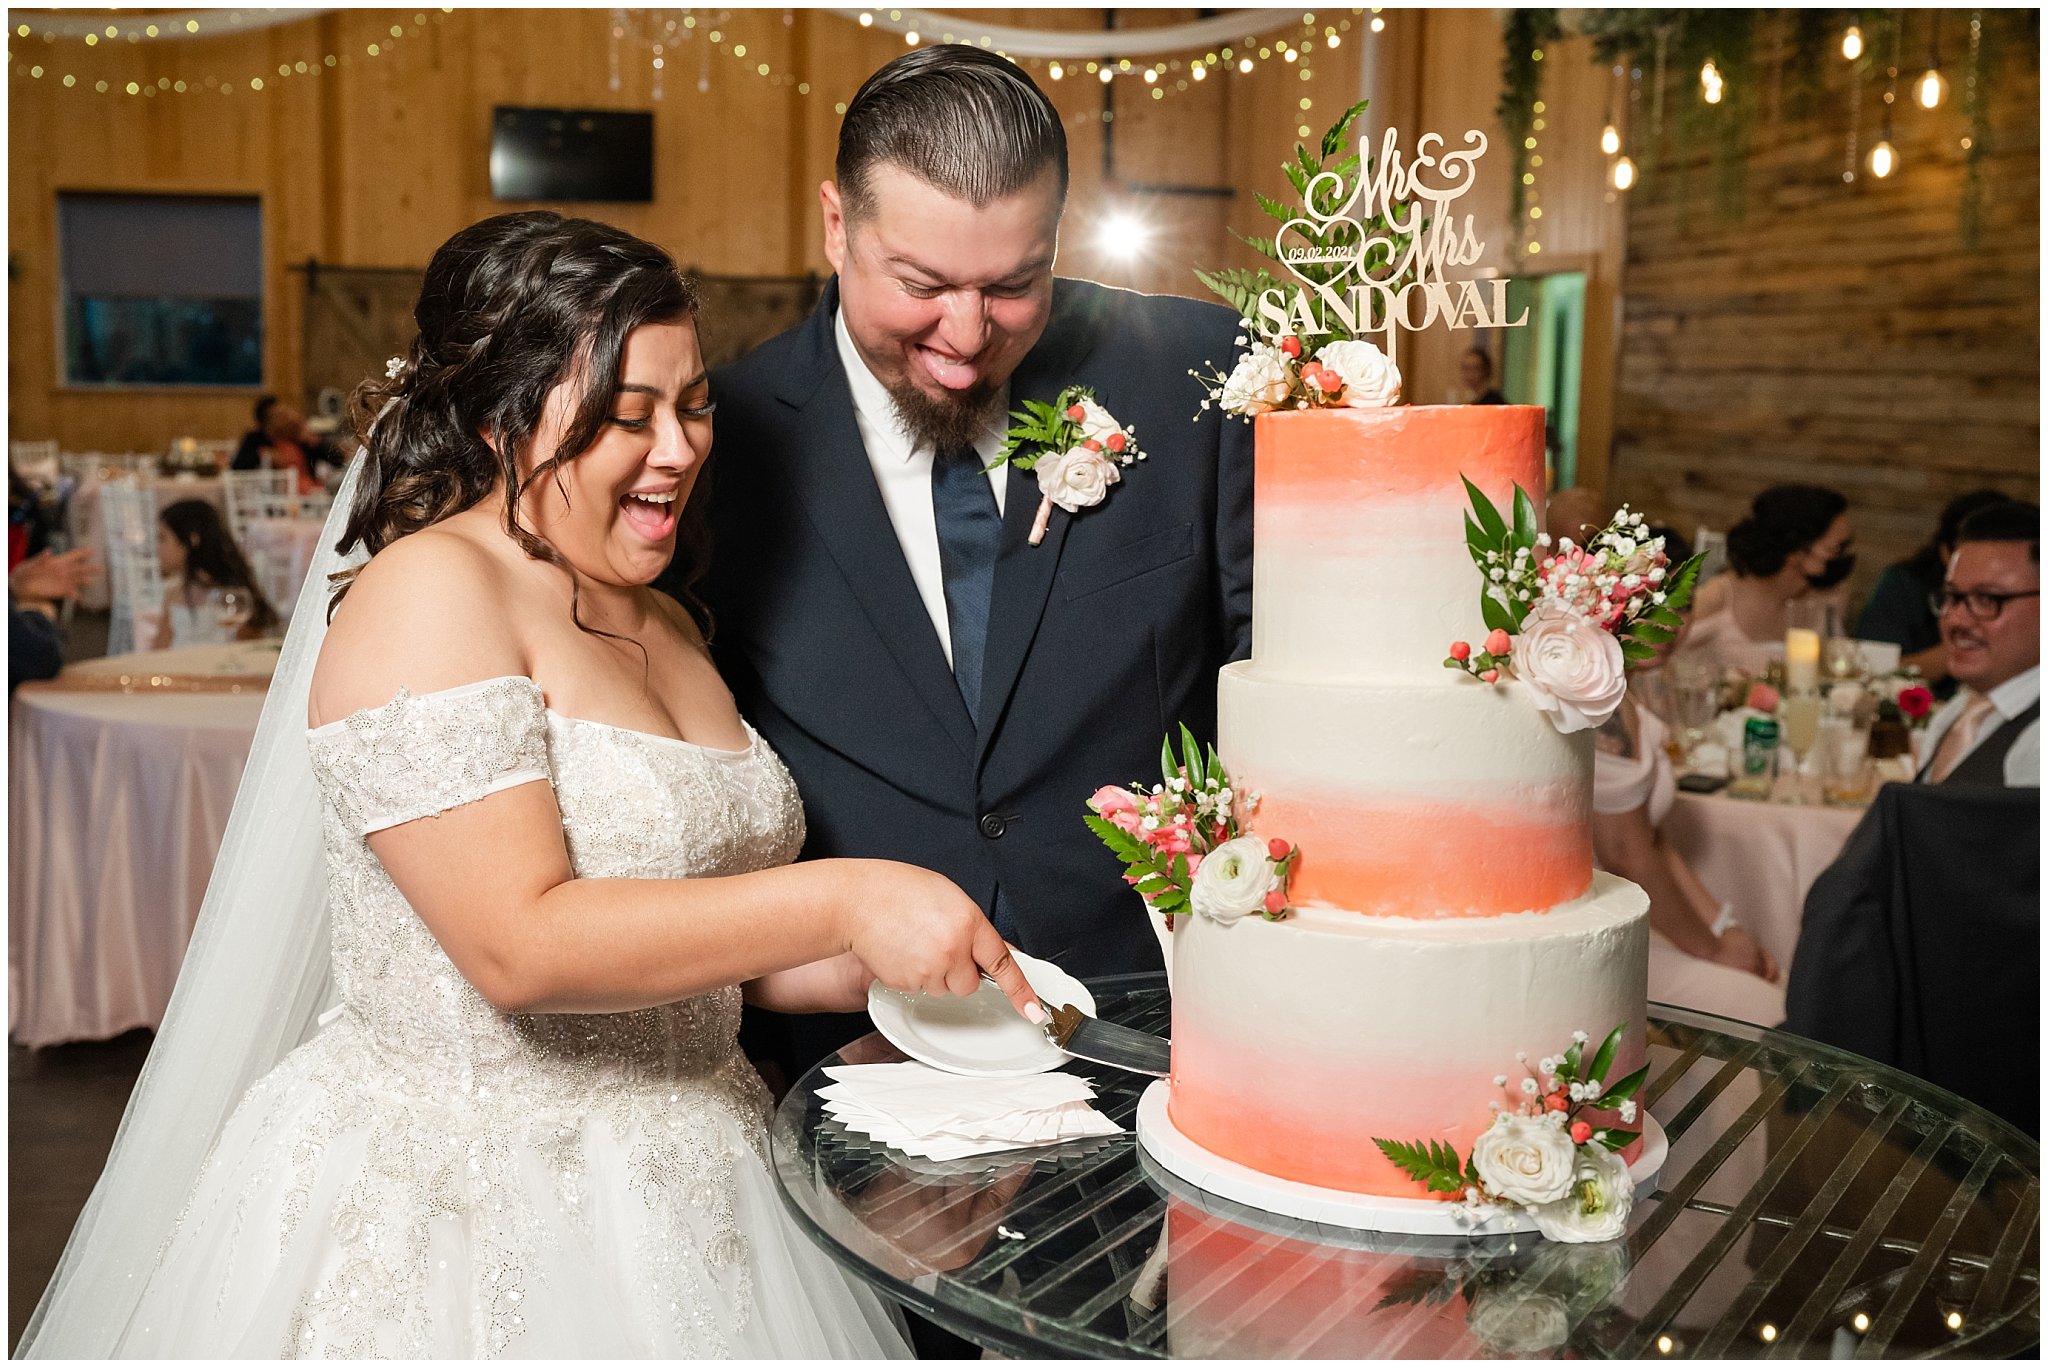 Cake cutting during rustic barn reception | Rustic Mountain Destination Wedding at Oak Hills Utah | Jessie and Dallin Photography